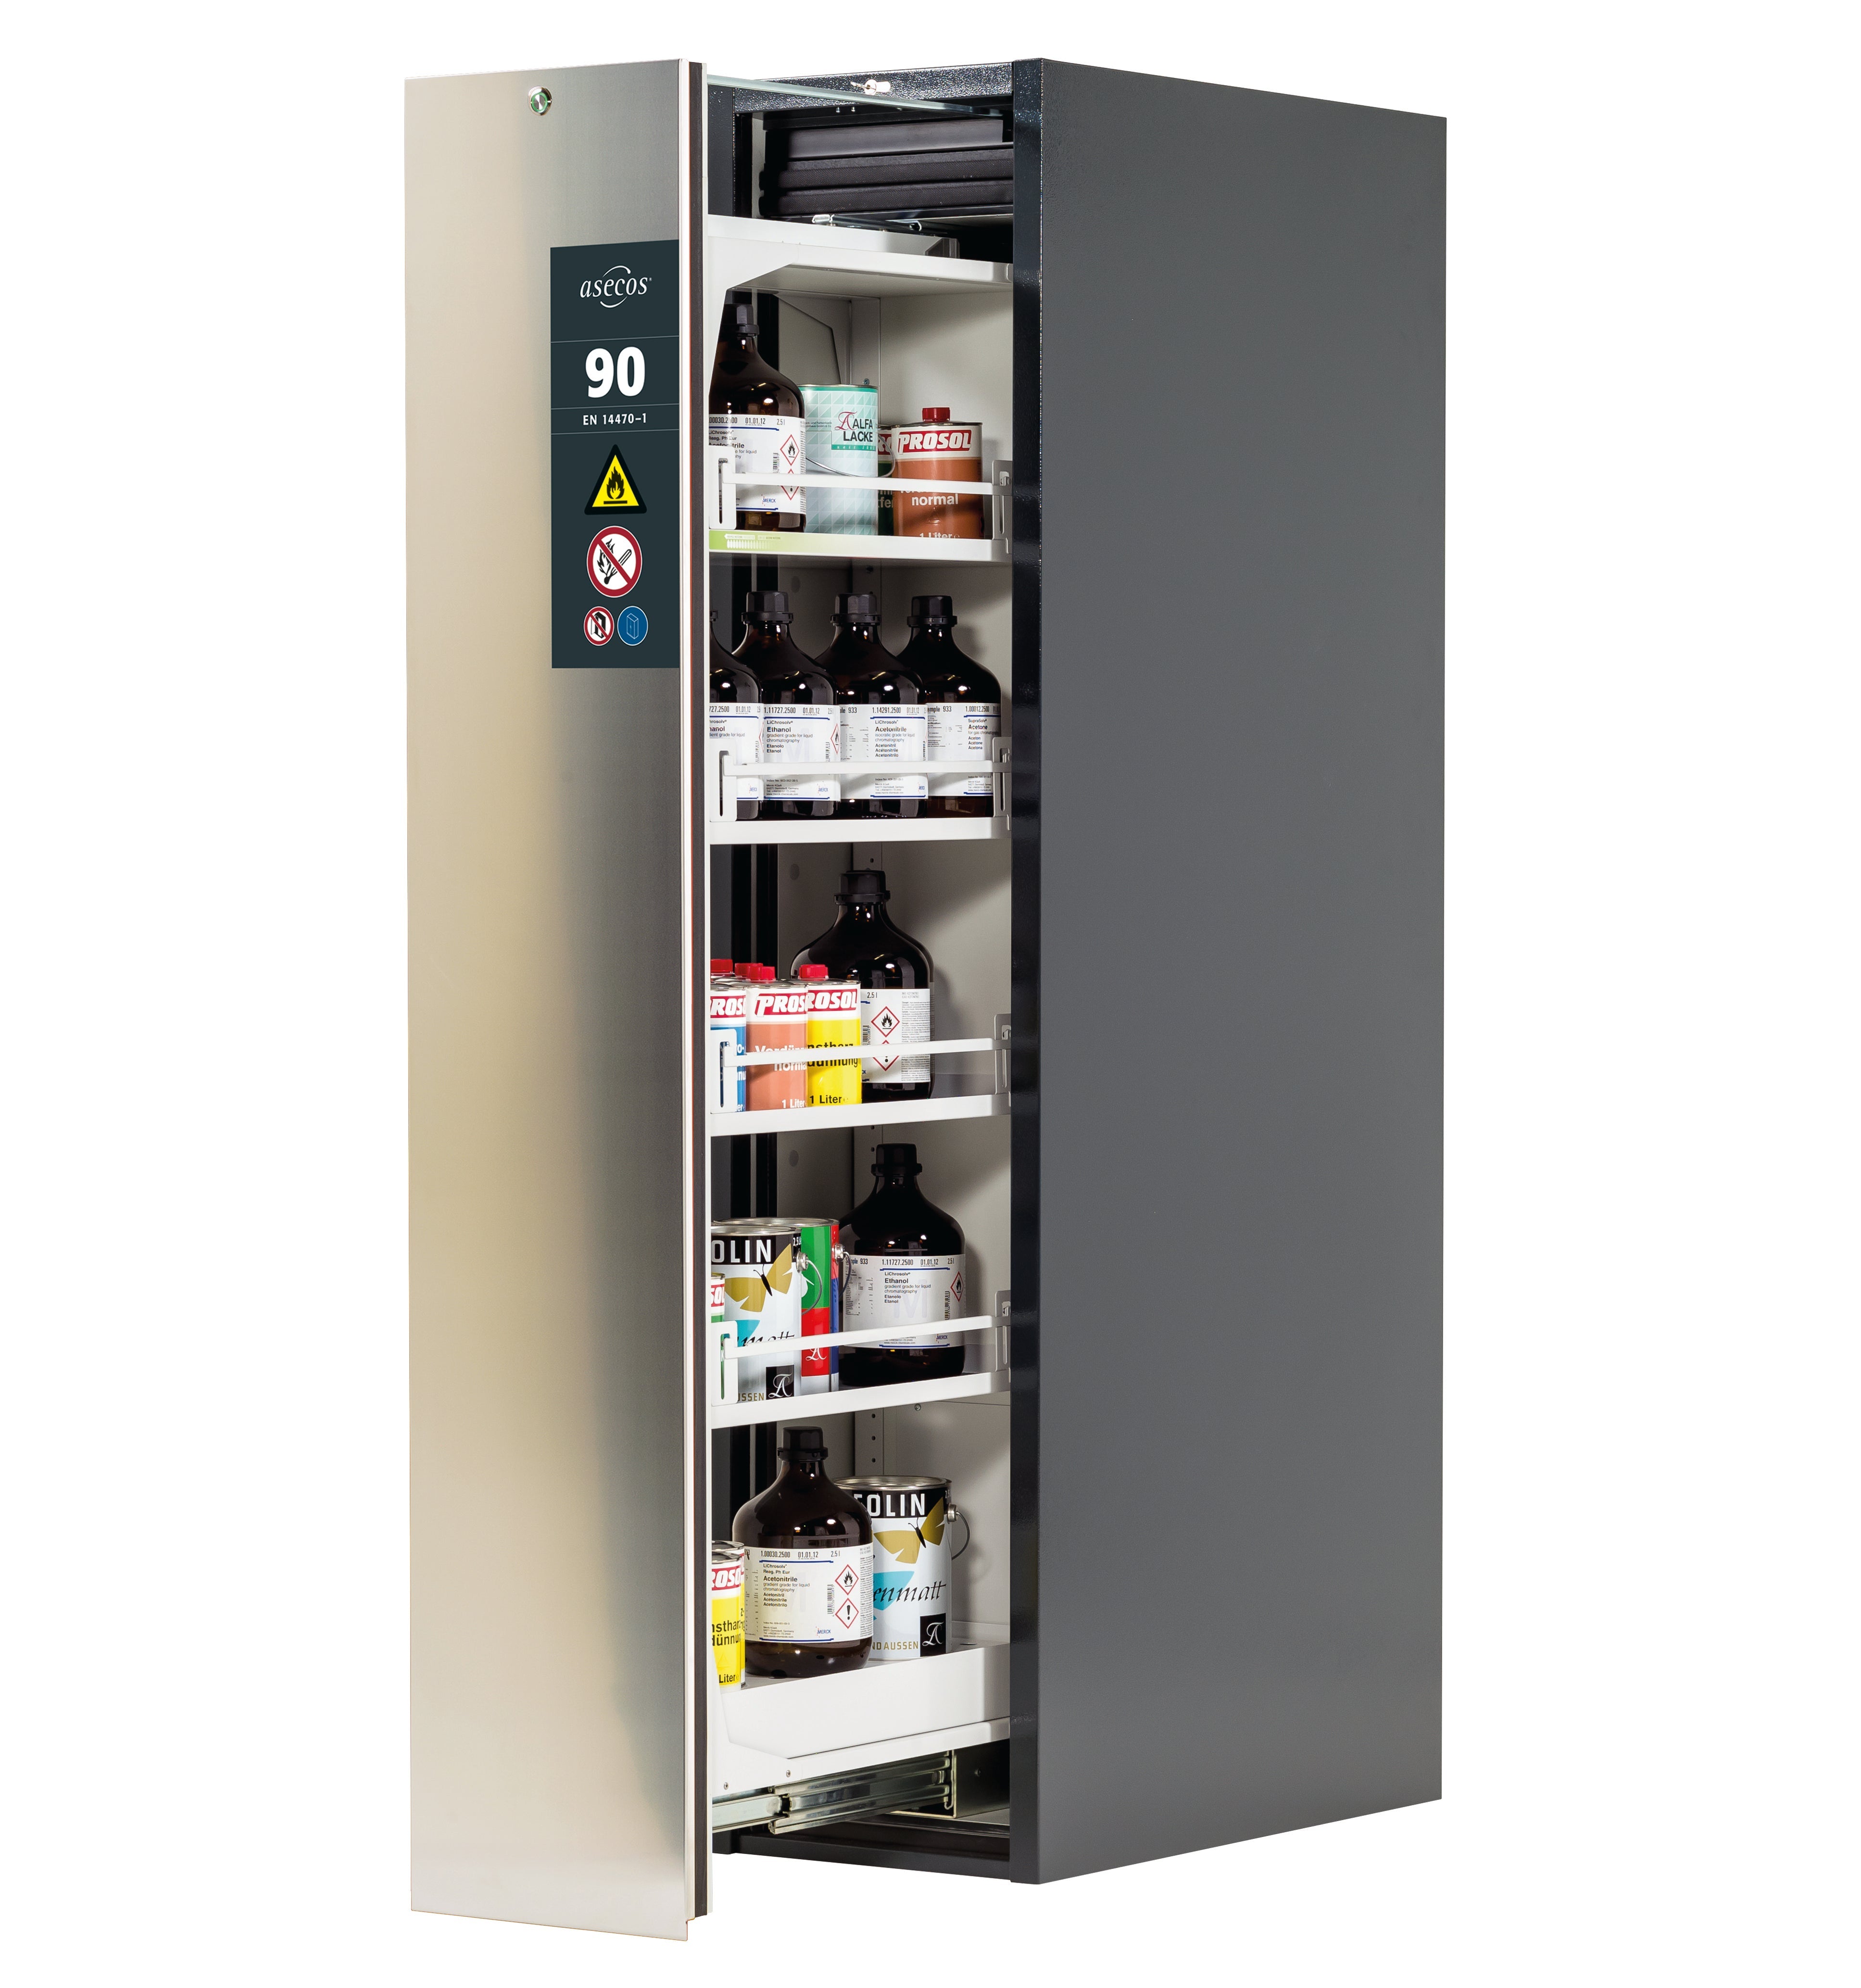 Type 90 safety cabinet V-MOVE-90 model V90.196.045.VDAC:0013 in stainless steel with 4x standard shelves (sheet steel)